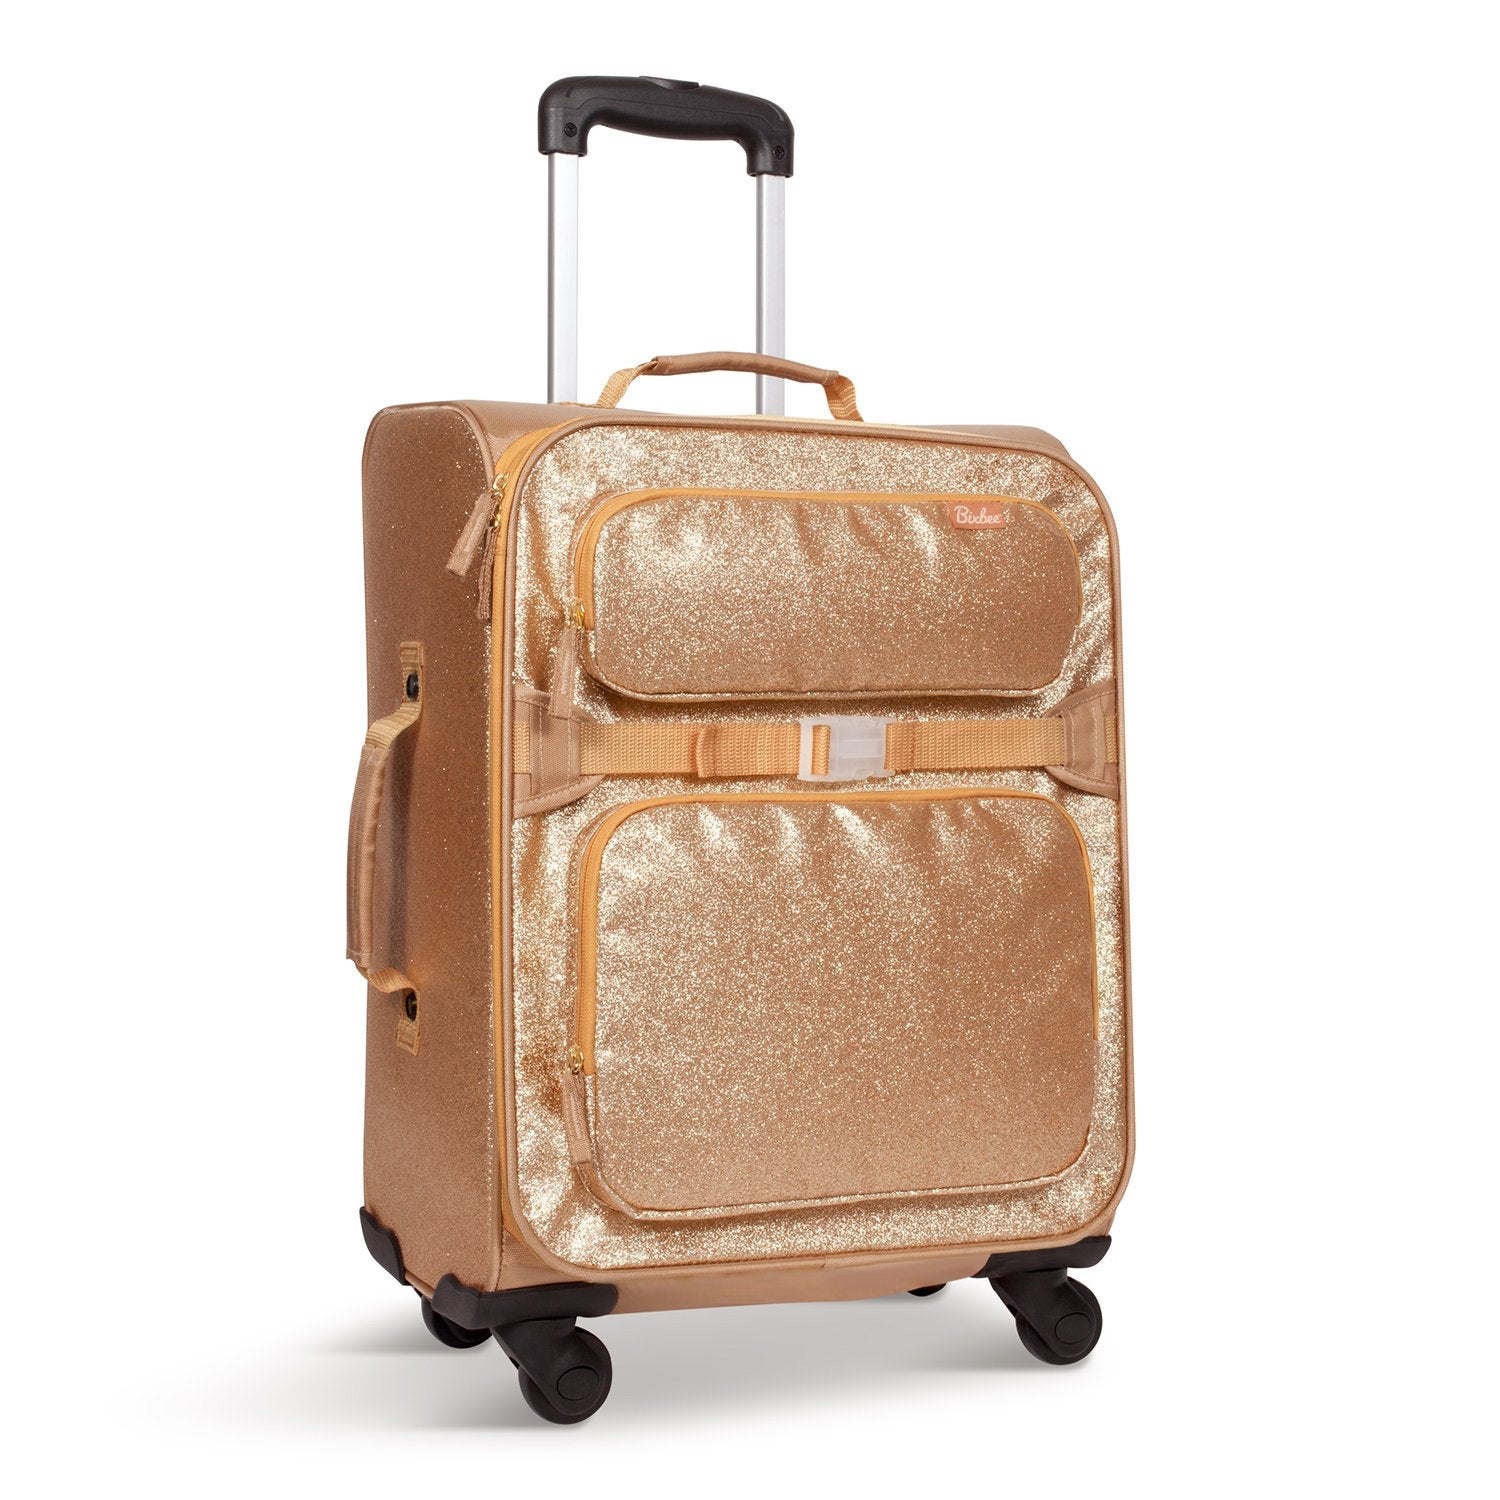 Image of Sparkalicious Gold Young Traveler Luggage - 4 wheel